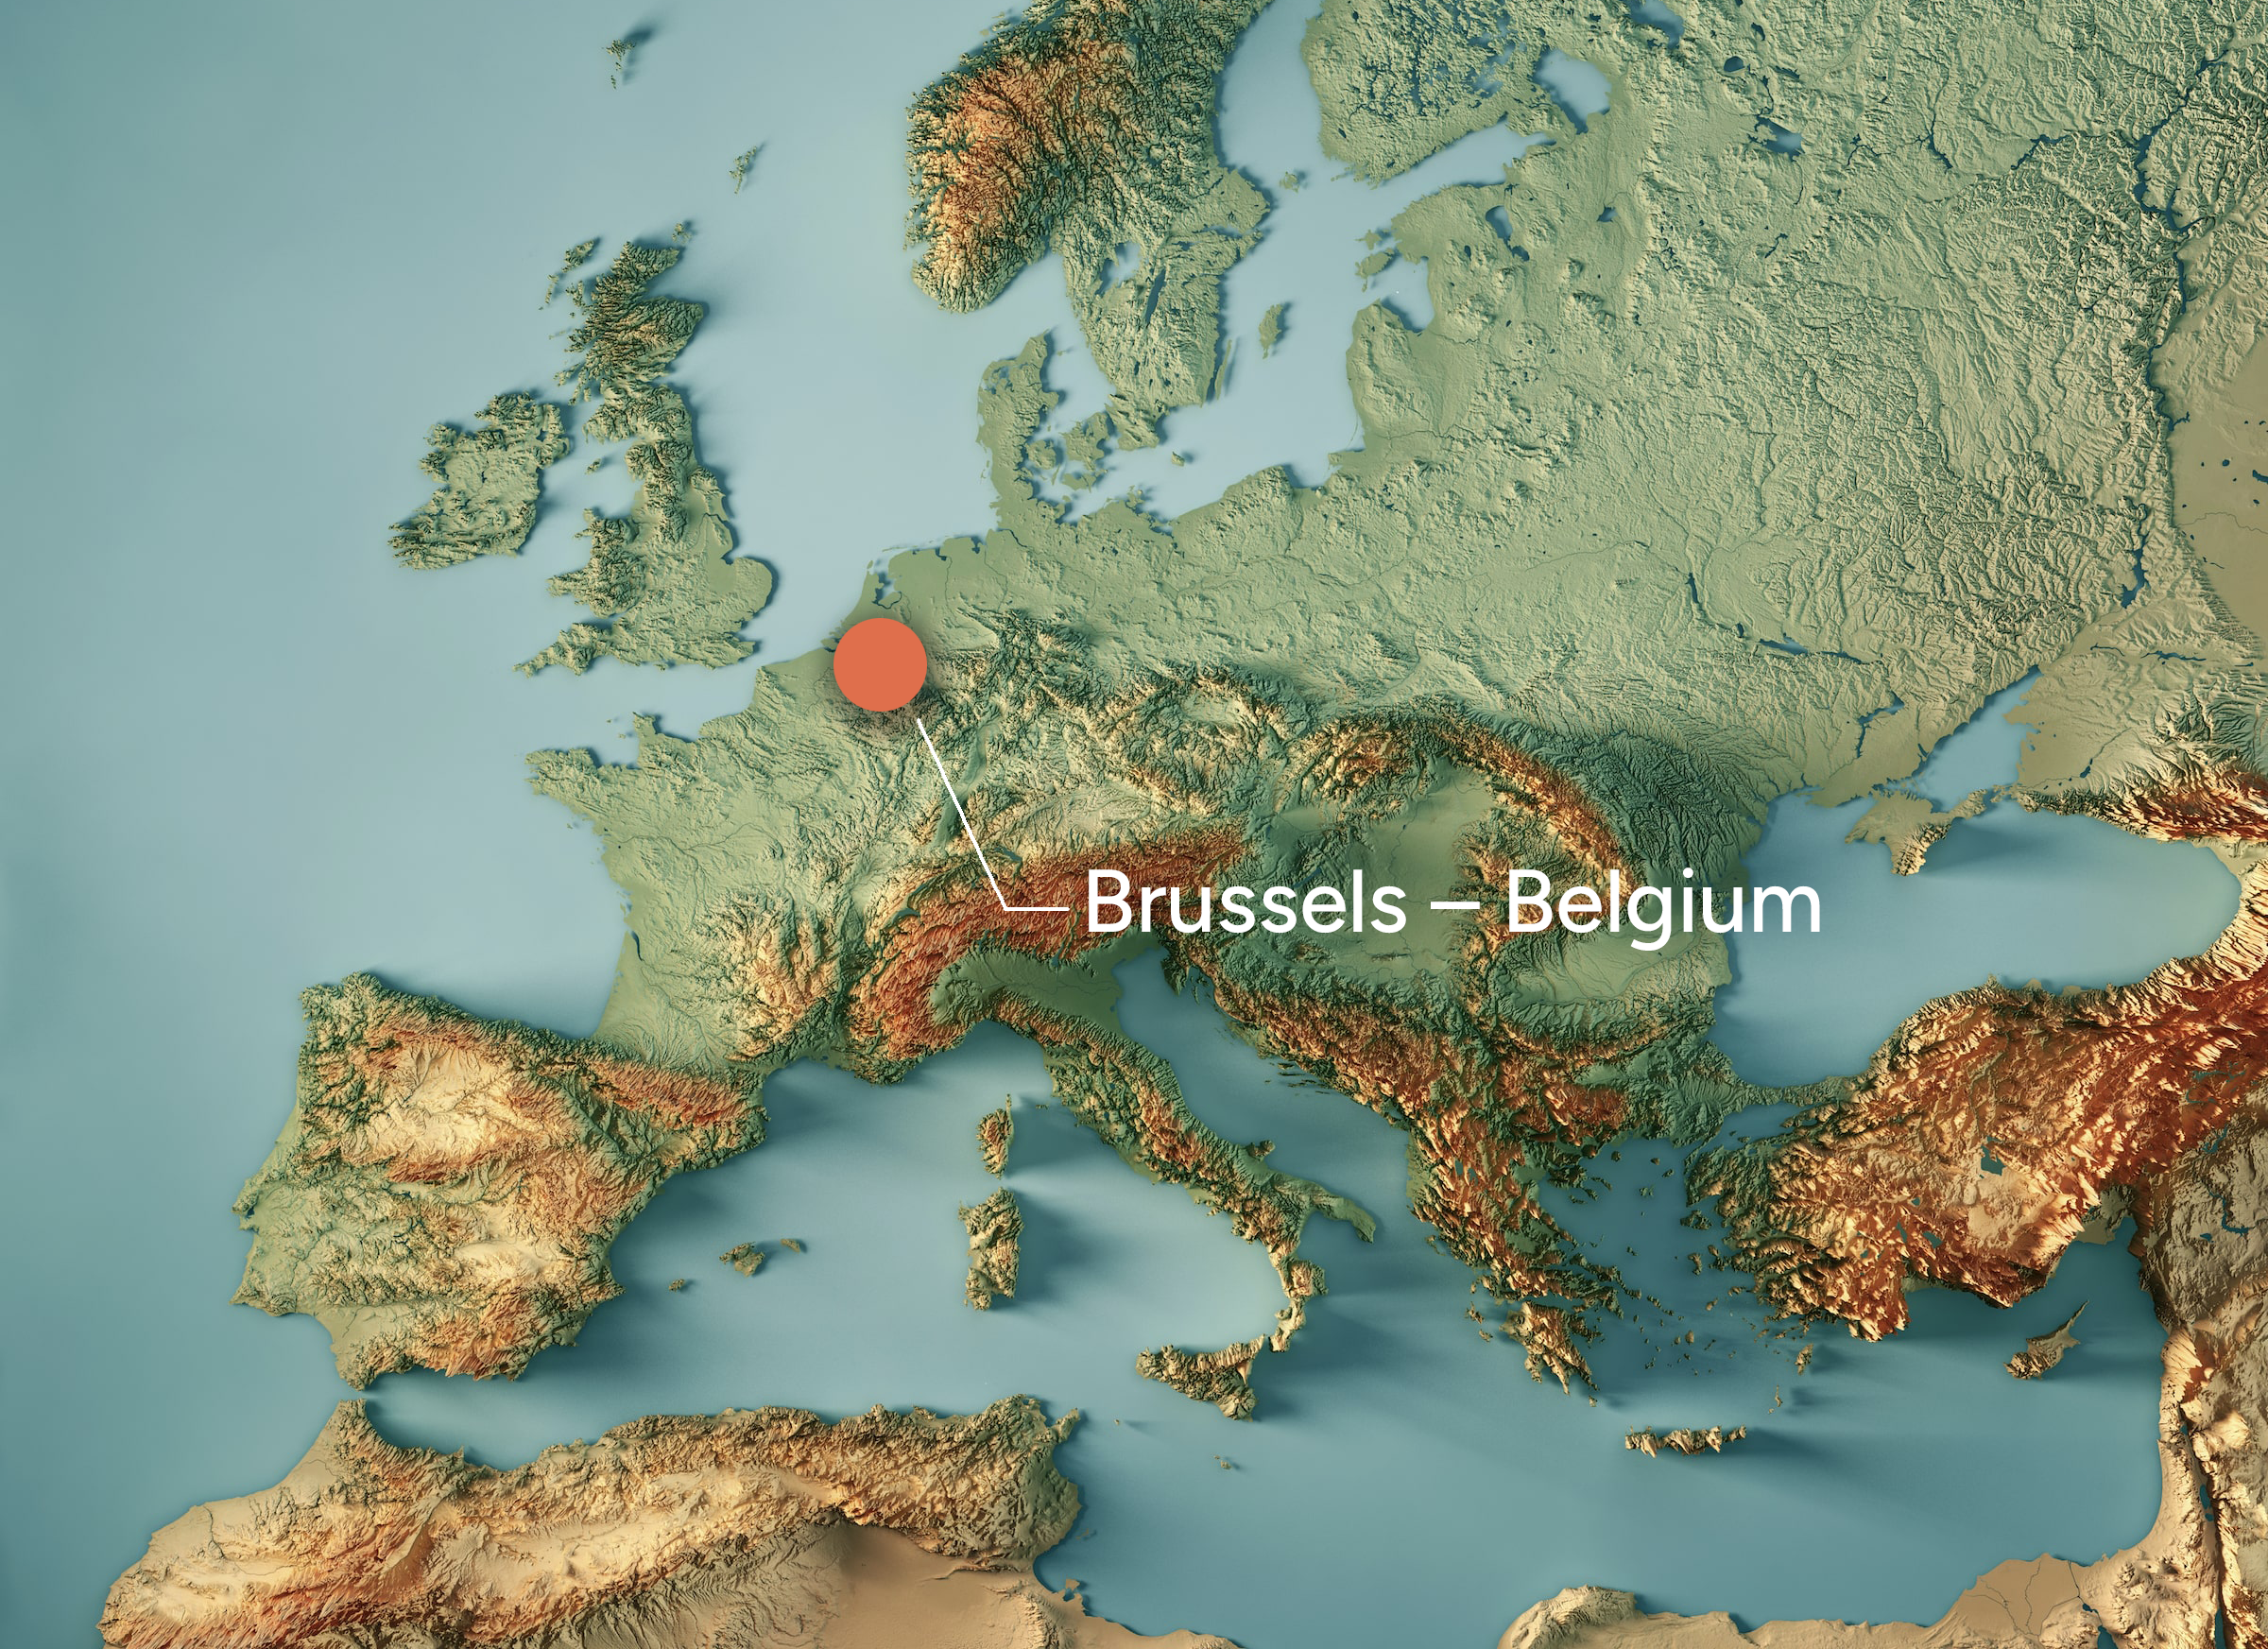 Topography map of Europe highlighting Brussels, Belgium